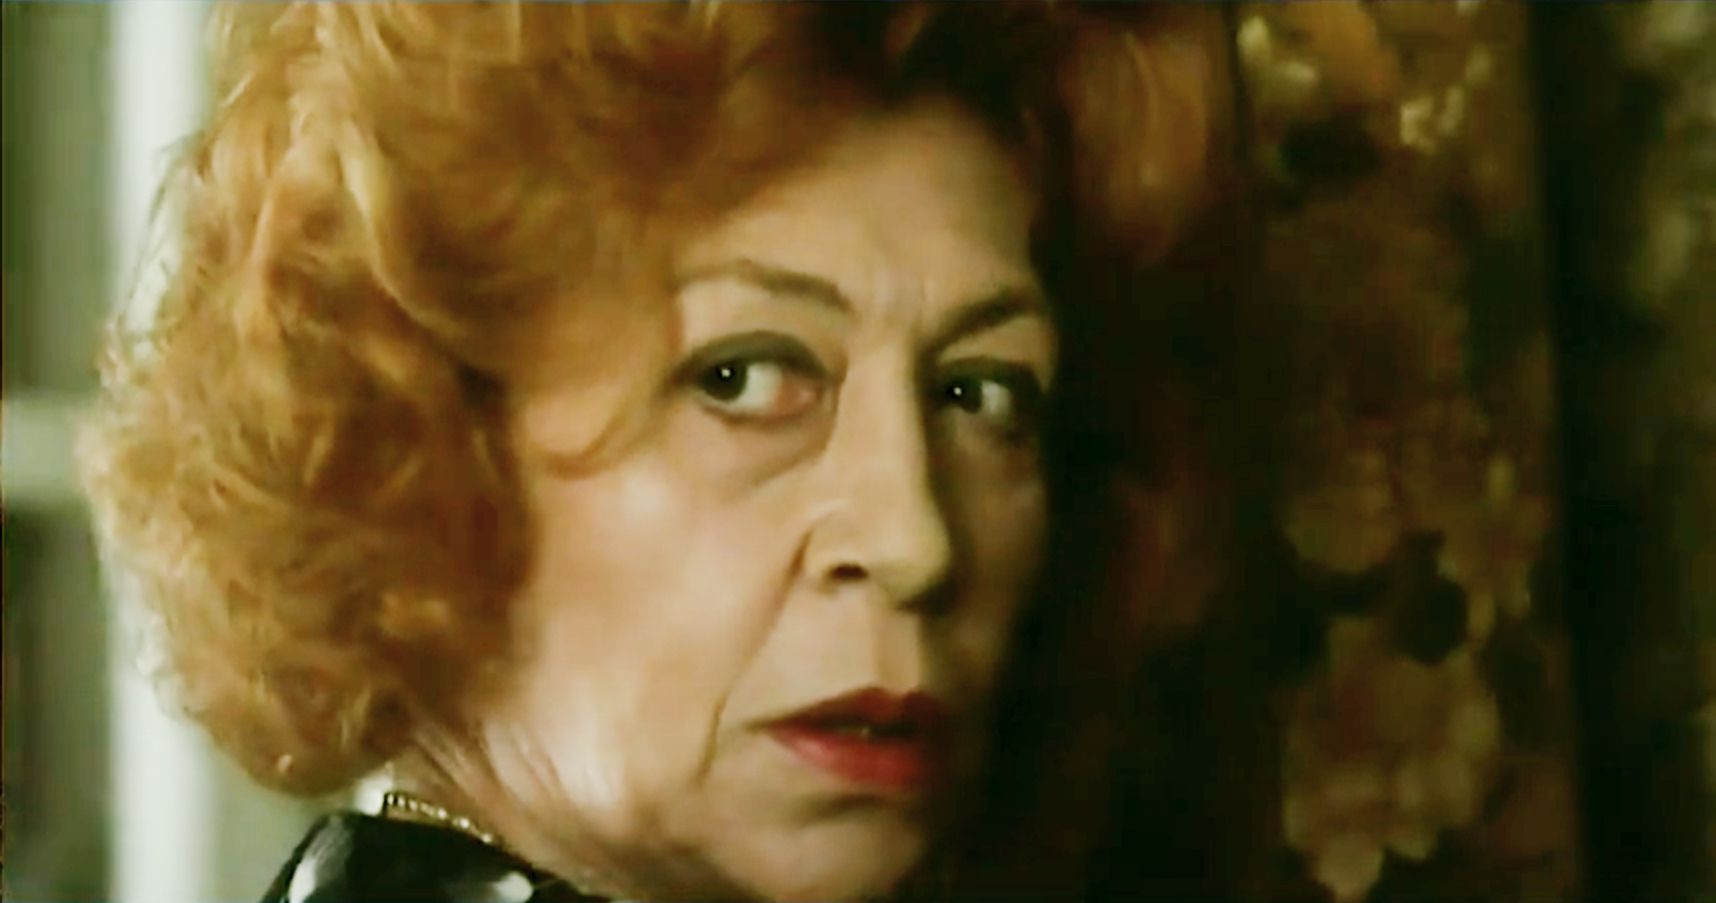 Pilar Bardem Dies, Spanish Actress and Mother of Javier Bardem Was 82